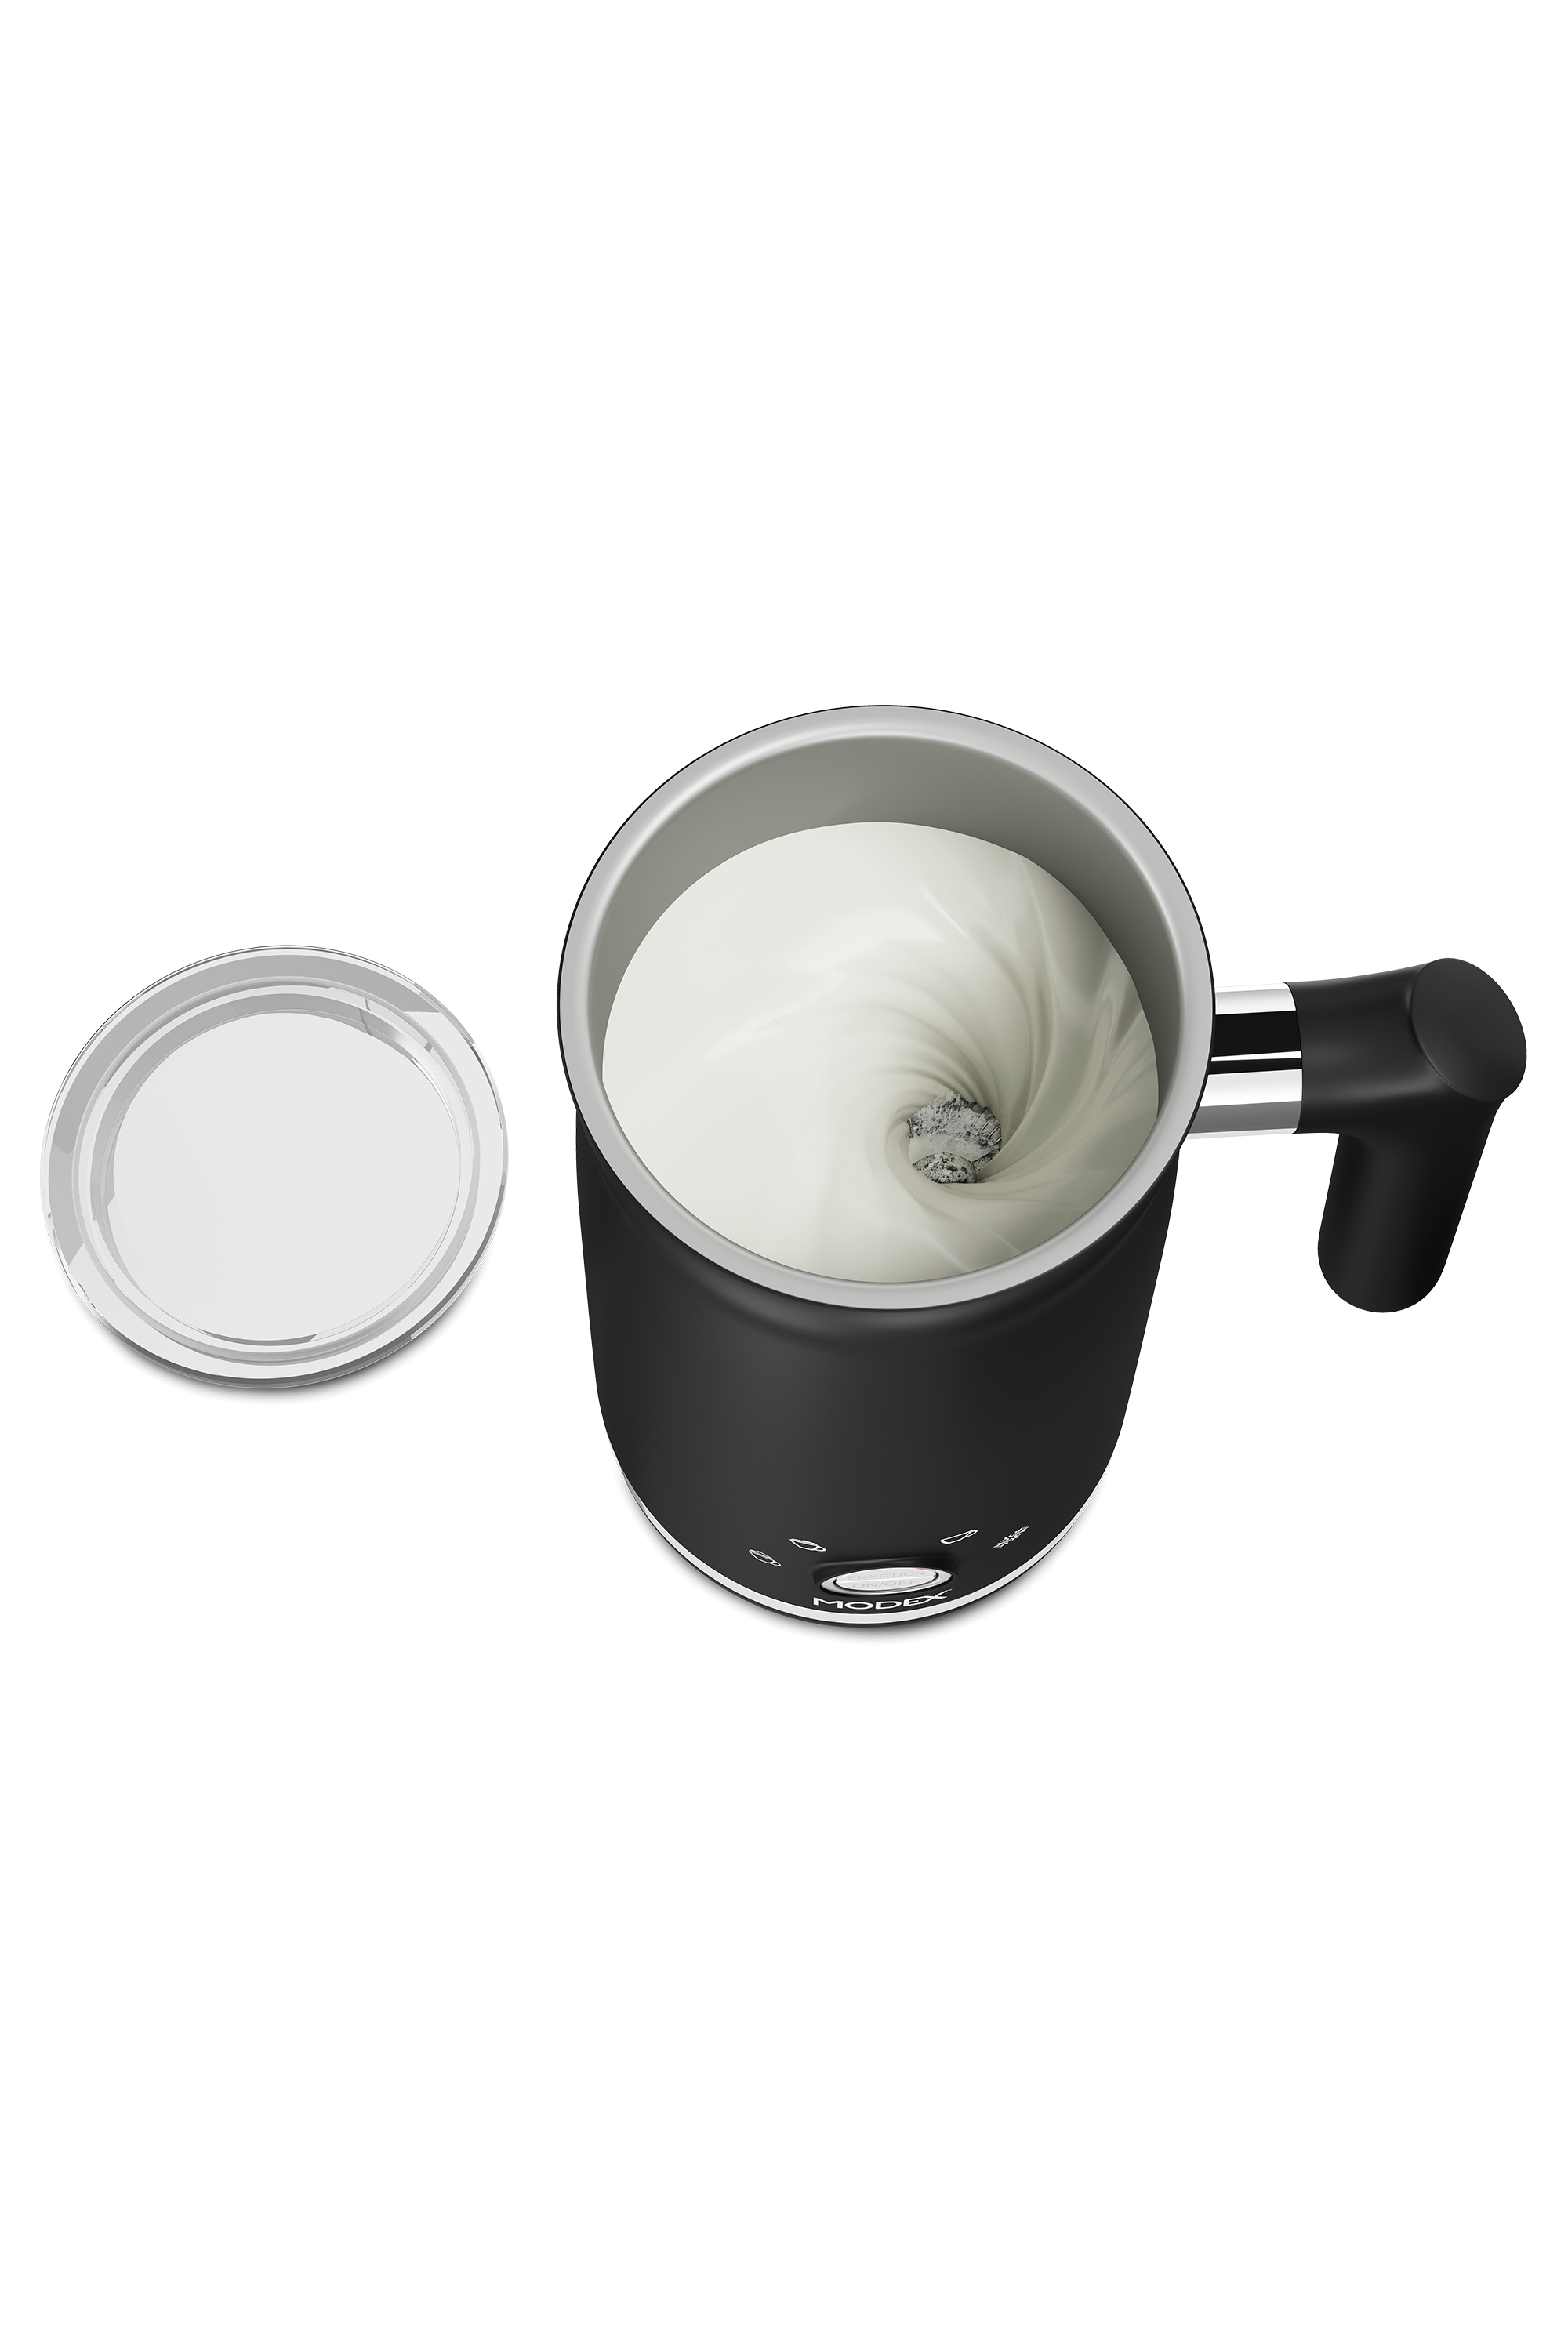 Mf1000 Milk Frother